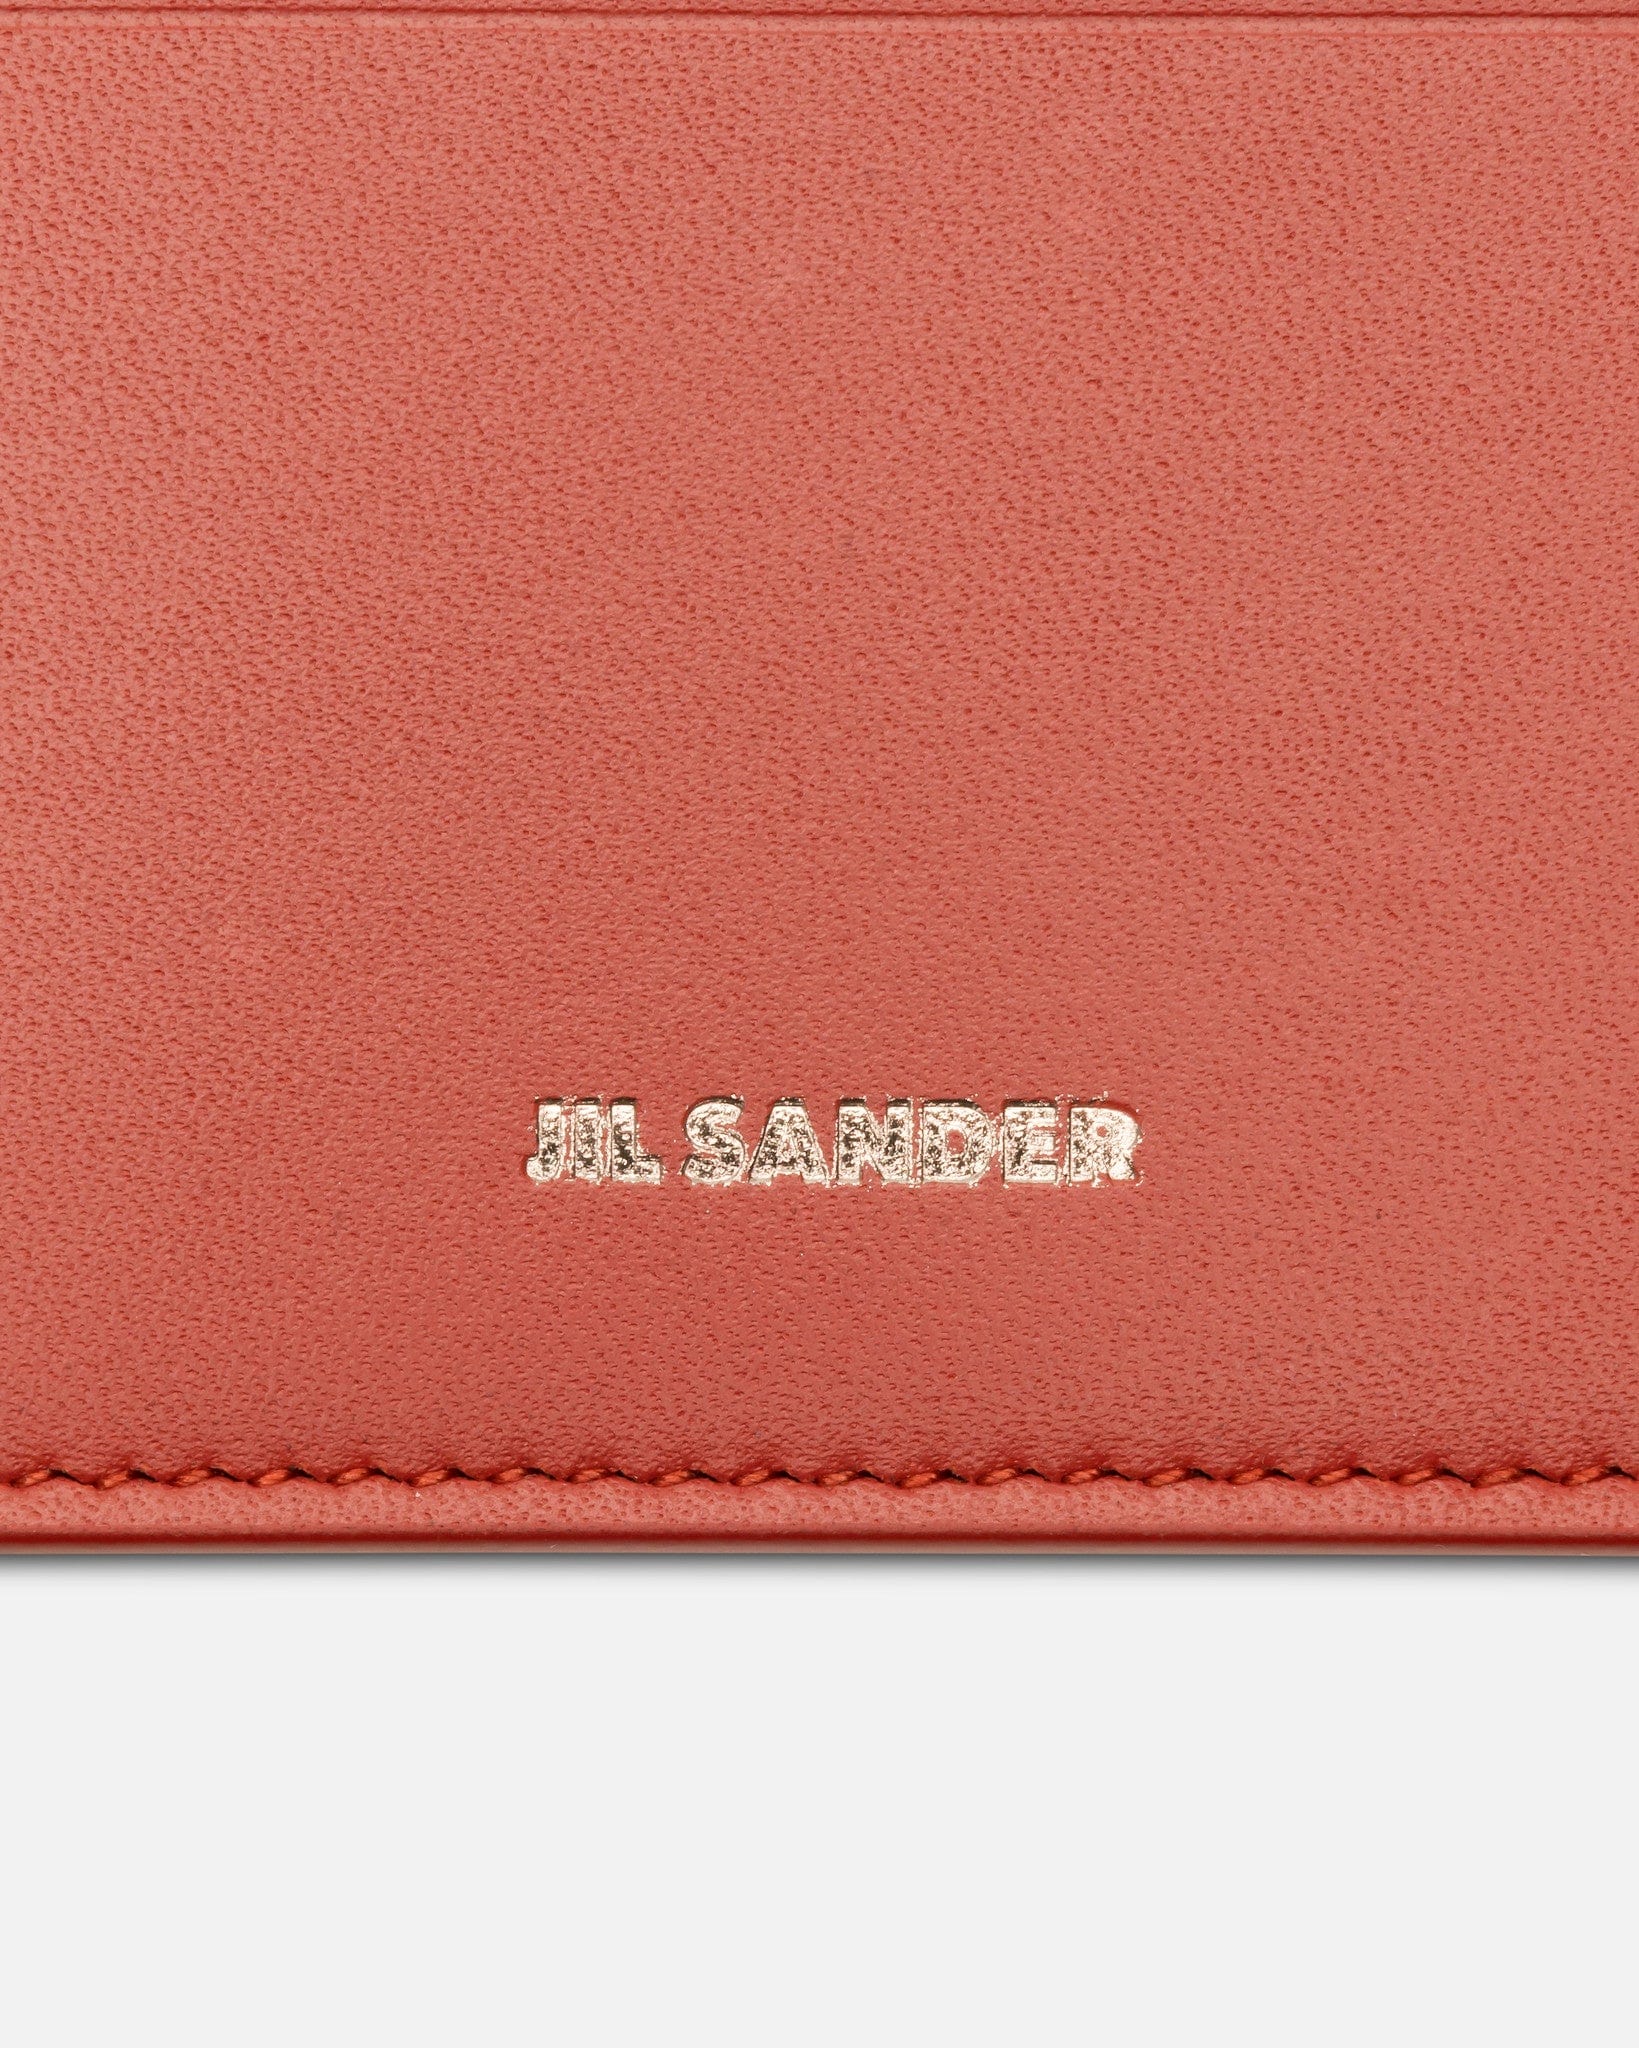 Calf Leather with Nappa Lining Credit Card Holder in Brick – SVRN